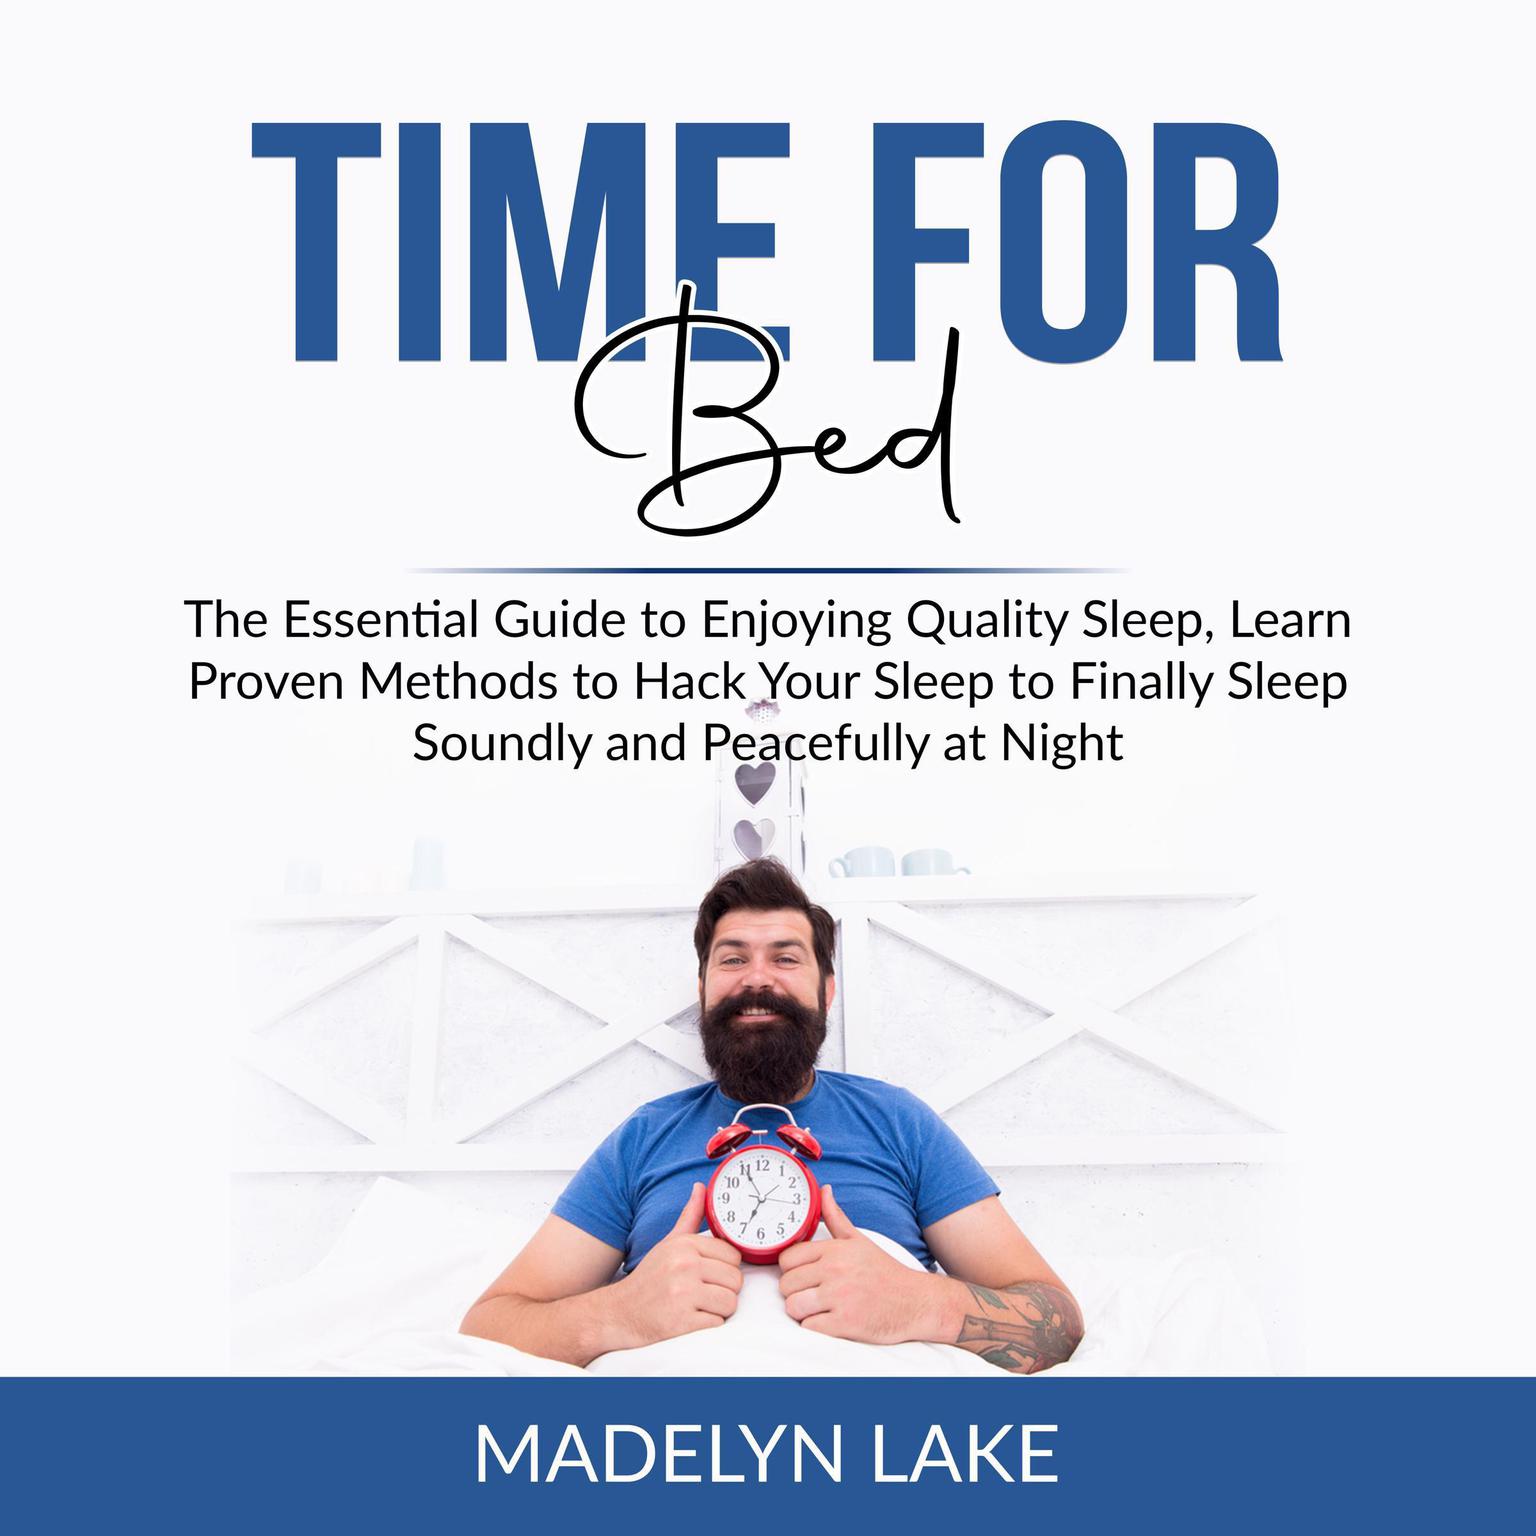 Time For Bed: The Essential Guide to Enjoying Quality Sleep, Learn Proven Methods to Hack Your Sleep to Finally Sleep Soundly and Peacefully at Night: The Essential Guide to Enjoying Quality Sleep, Learn Proven Methods to Hack Your Sleep to Finally Sleep Soundly and Peacefully at Night  Audiobook, by Madelyn Lake